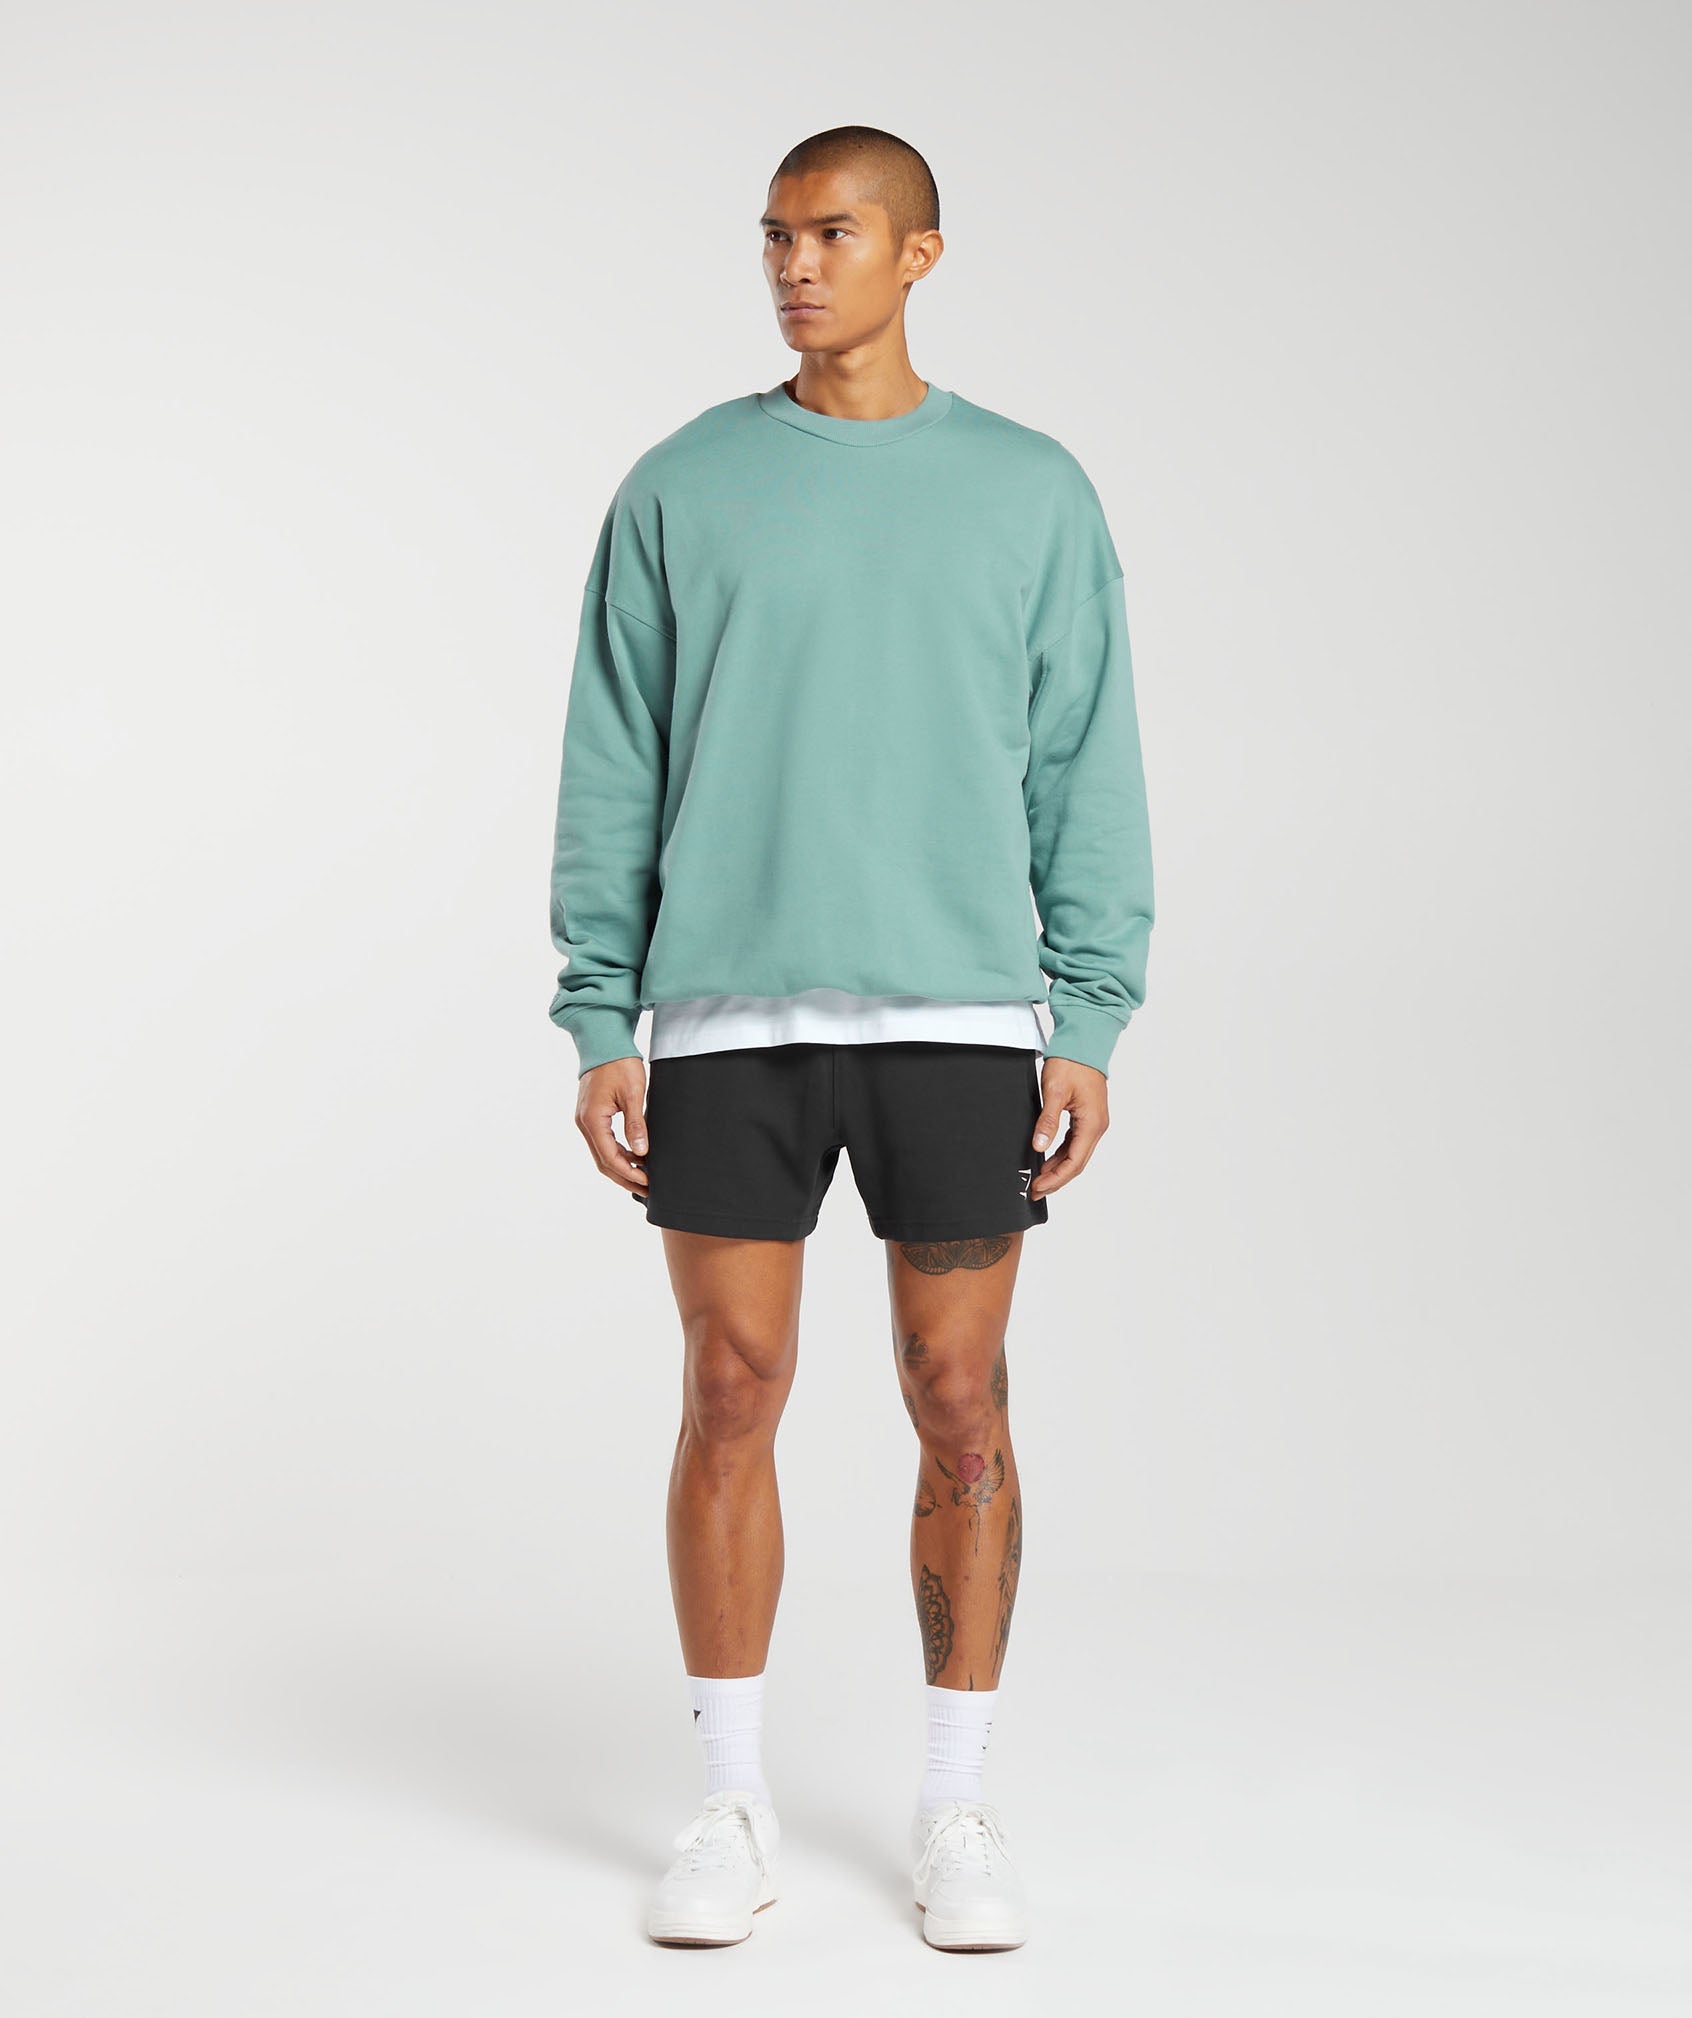 Rest Day Essential Crew in Duck Egg Blue - view 4